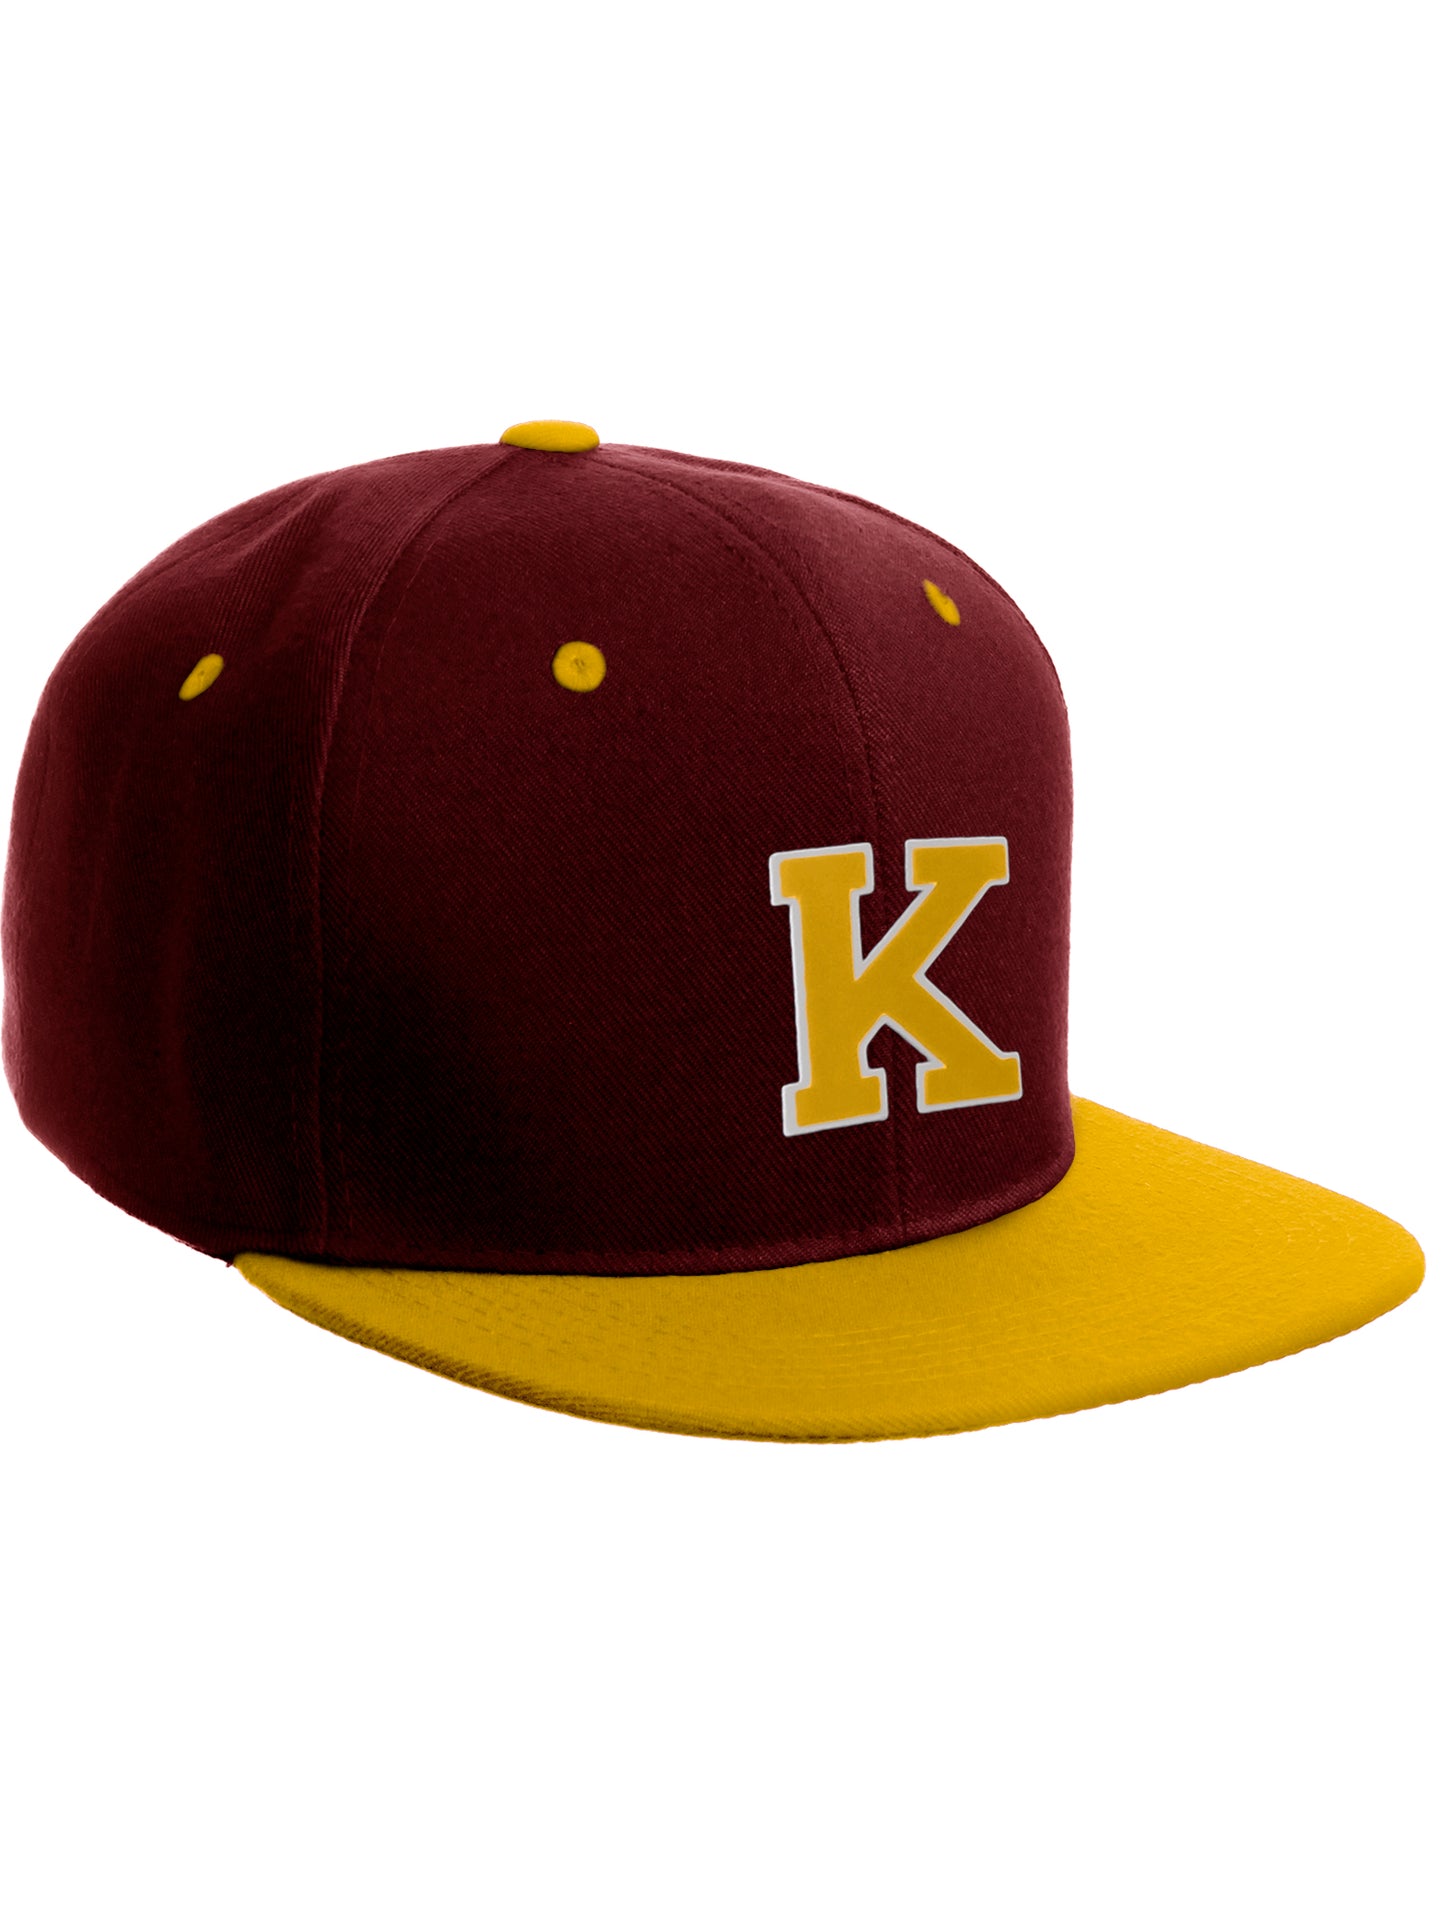 Classic Snapback Hat Custom A to Z Initial Letters, Burgundy Gold Cap White Gold